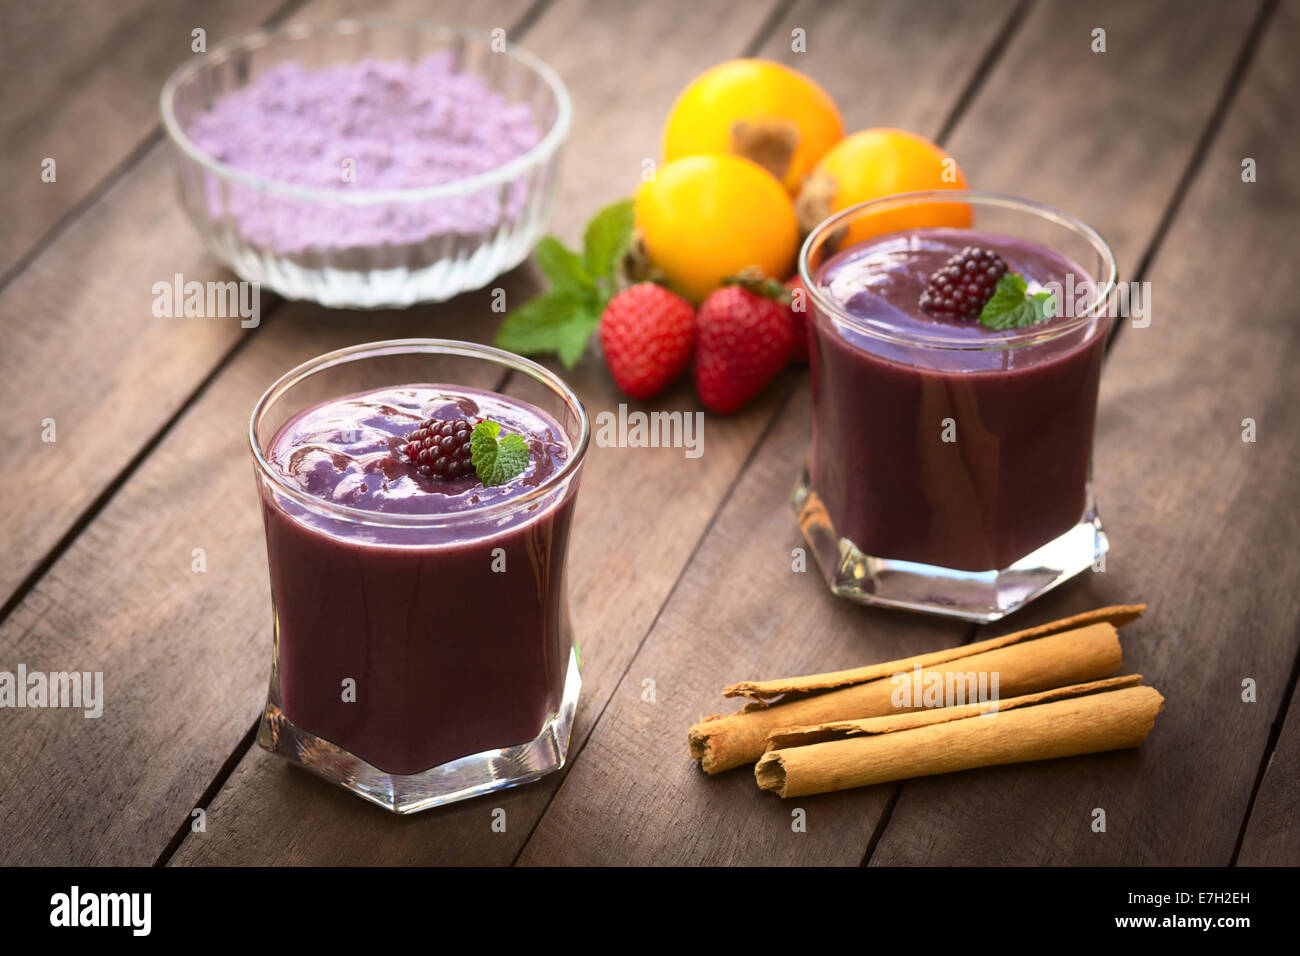 Ecuadorian traditional thick drink called Colada Morada, prepared by cooking purple corn flour and different fruits Stock Photo